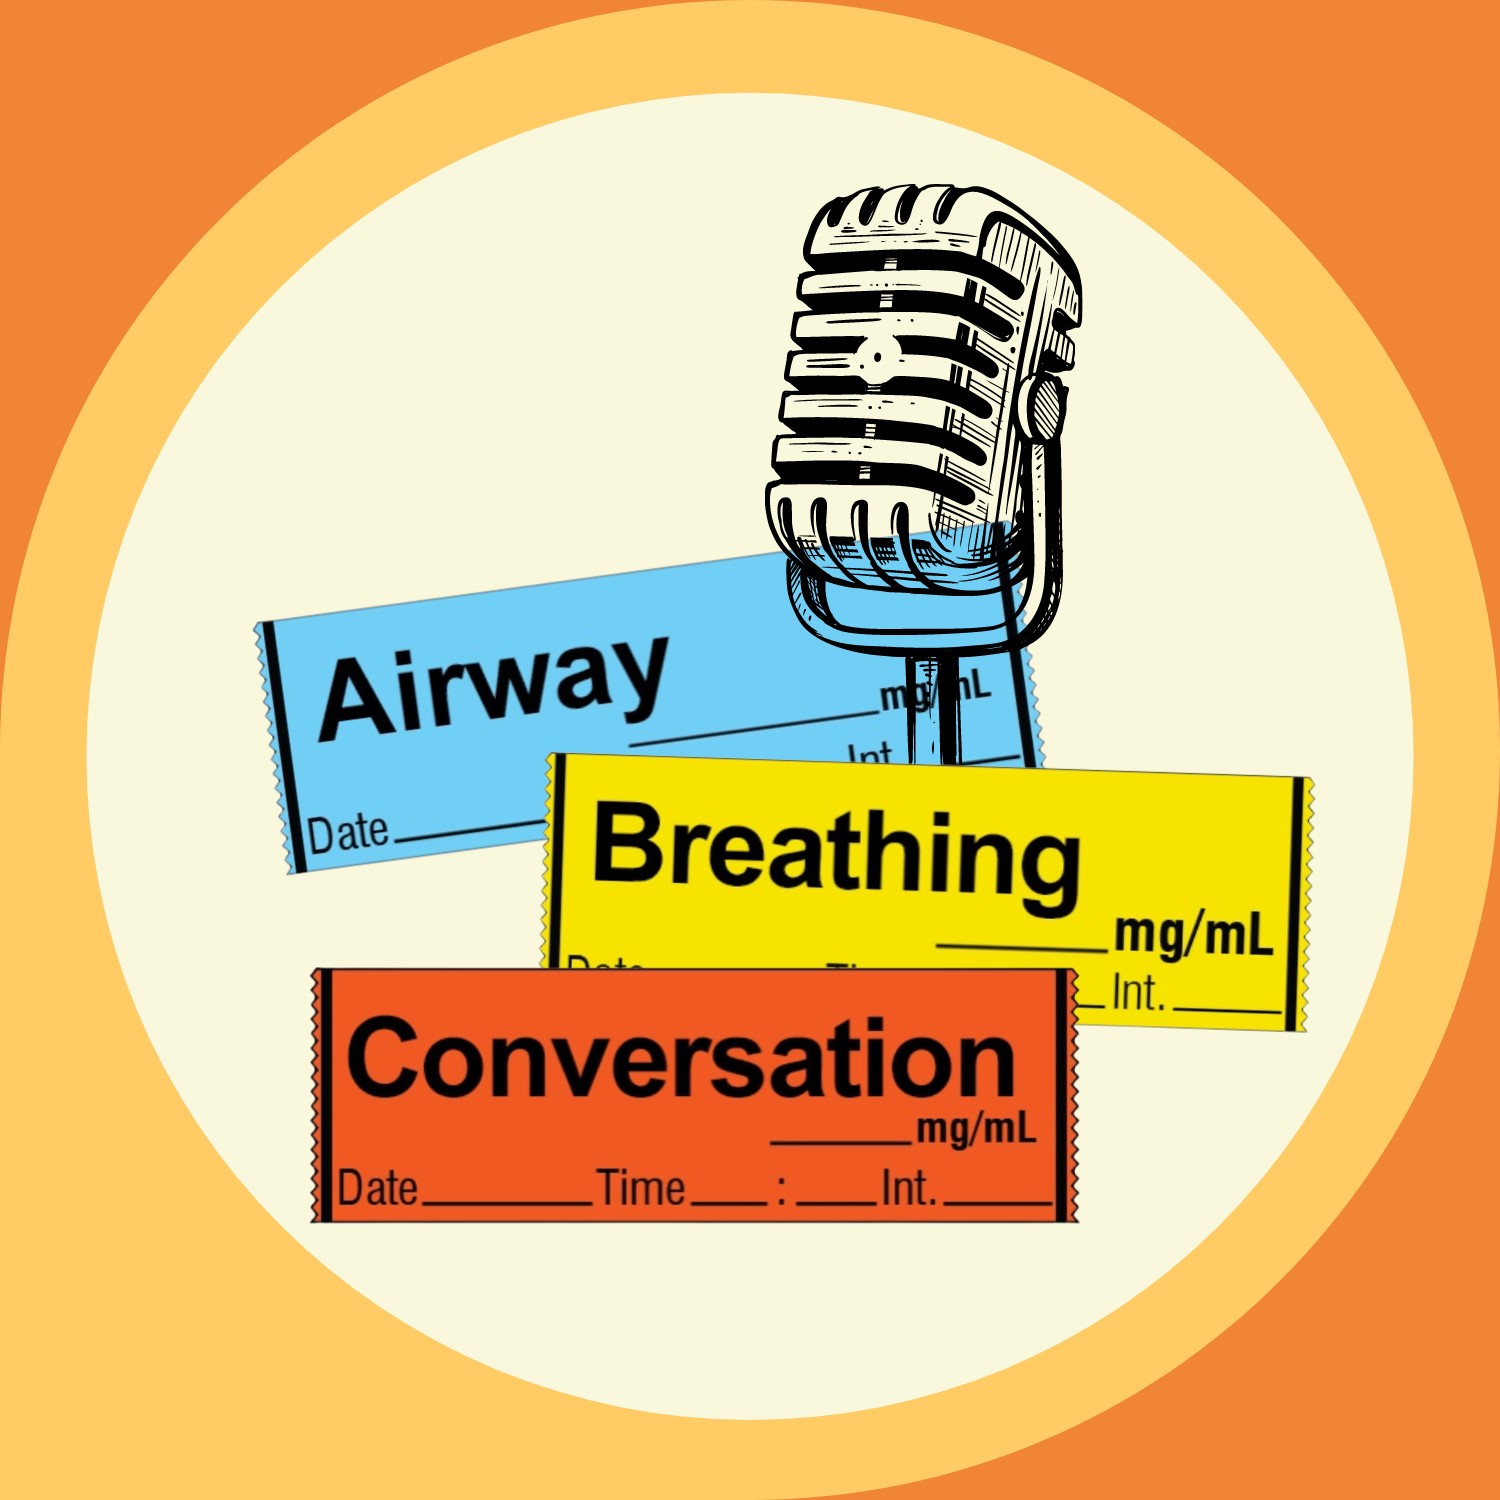 The Provincial Department of Anesthesiology has a Podcast: Airway Breathing Conversation